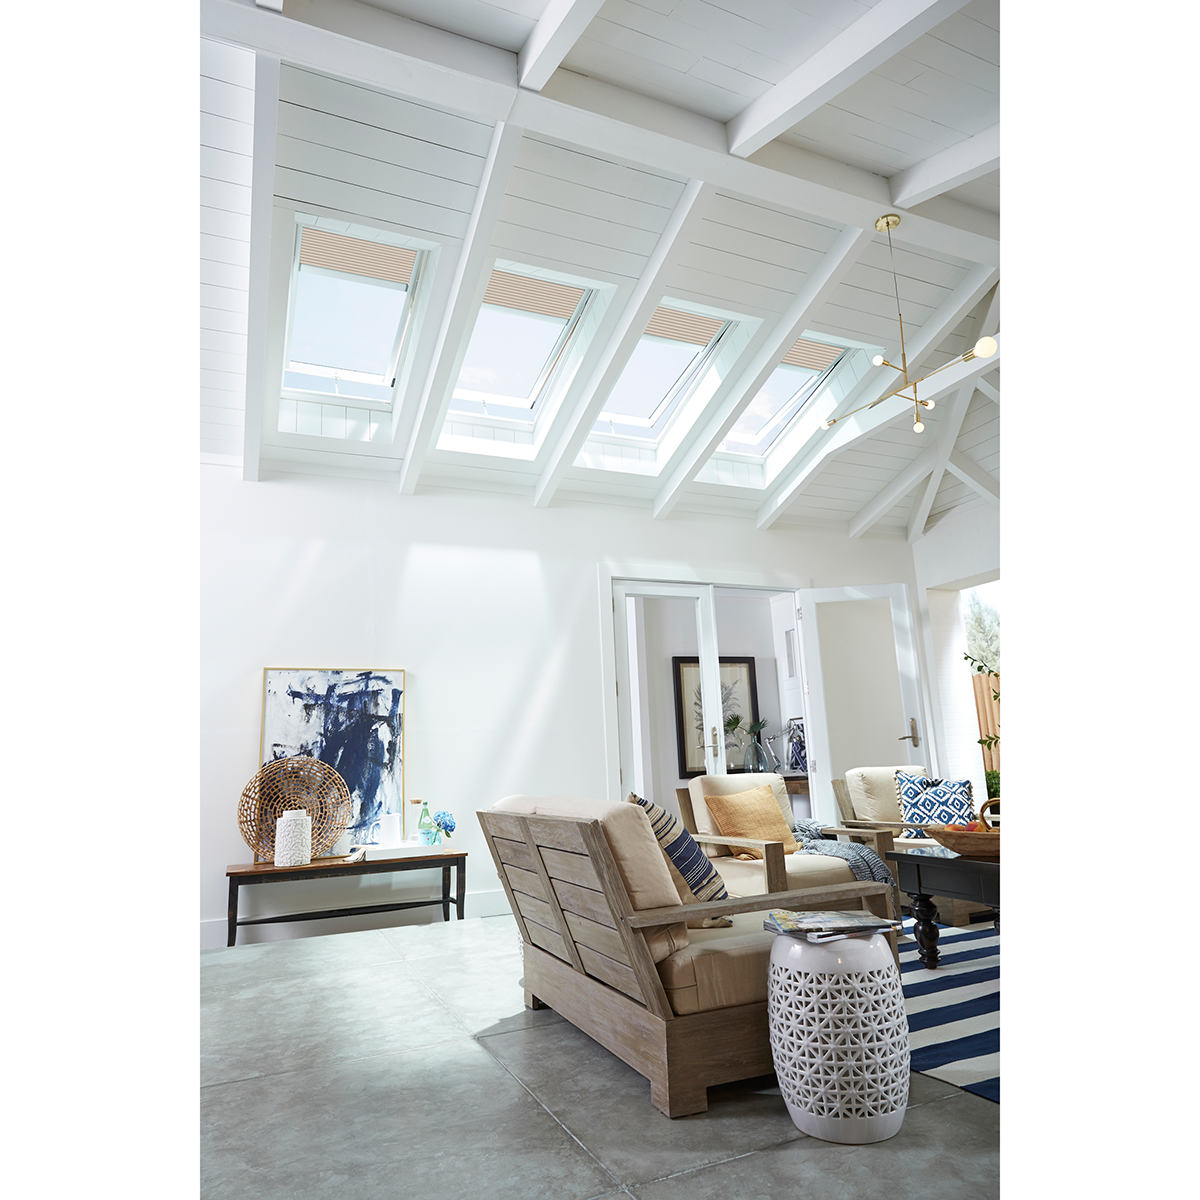 Electric Deck-Mount Skylight with Laminated Low-E3 Glass - 21 in. x 54-7/16 in. - VSE C08